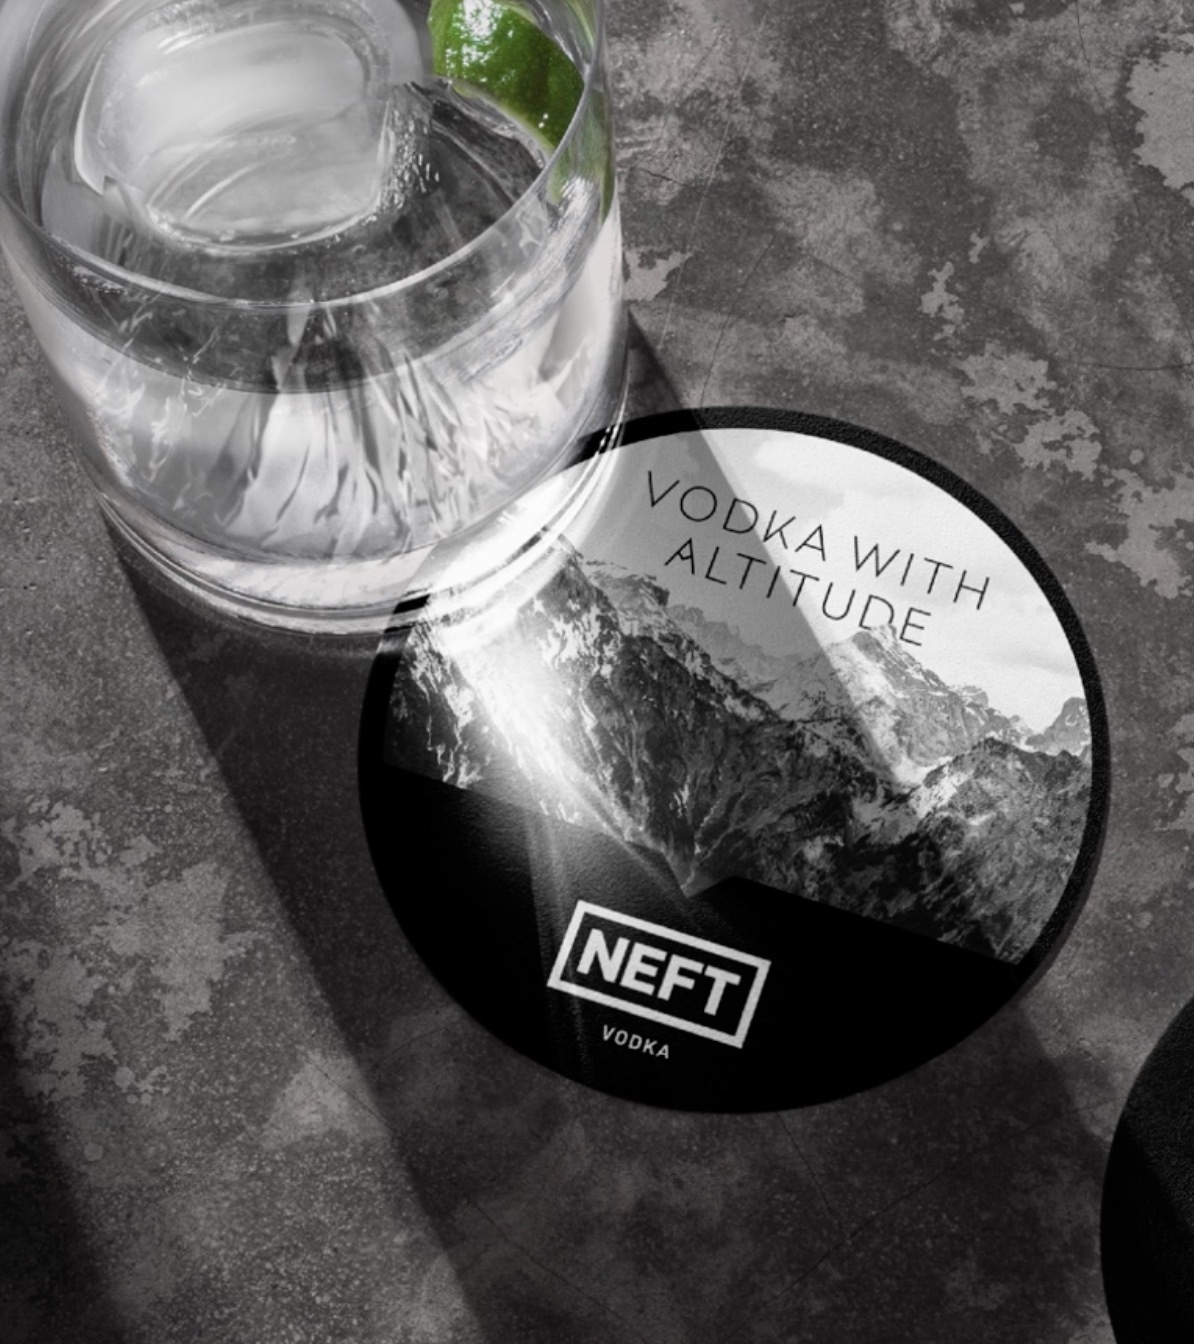 NEFT Vodka: Taking Customers To New Heights